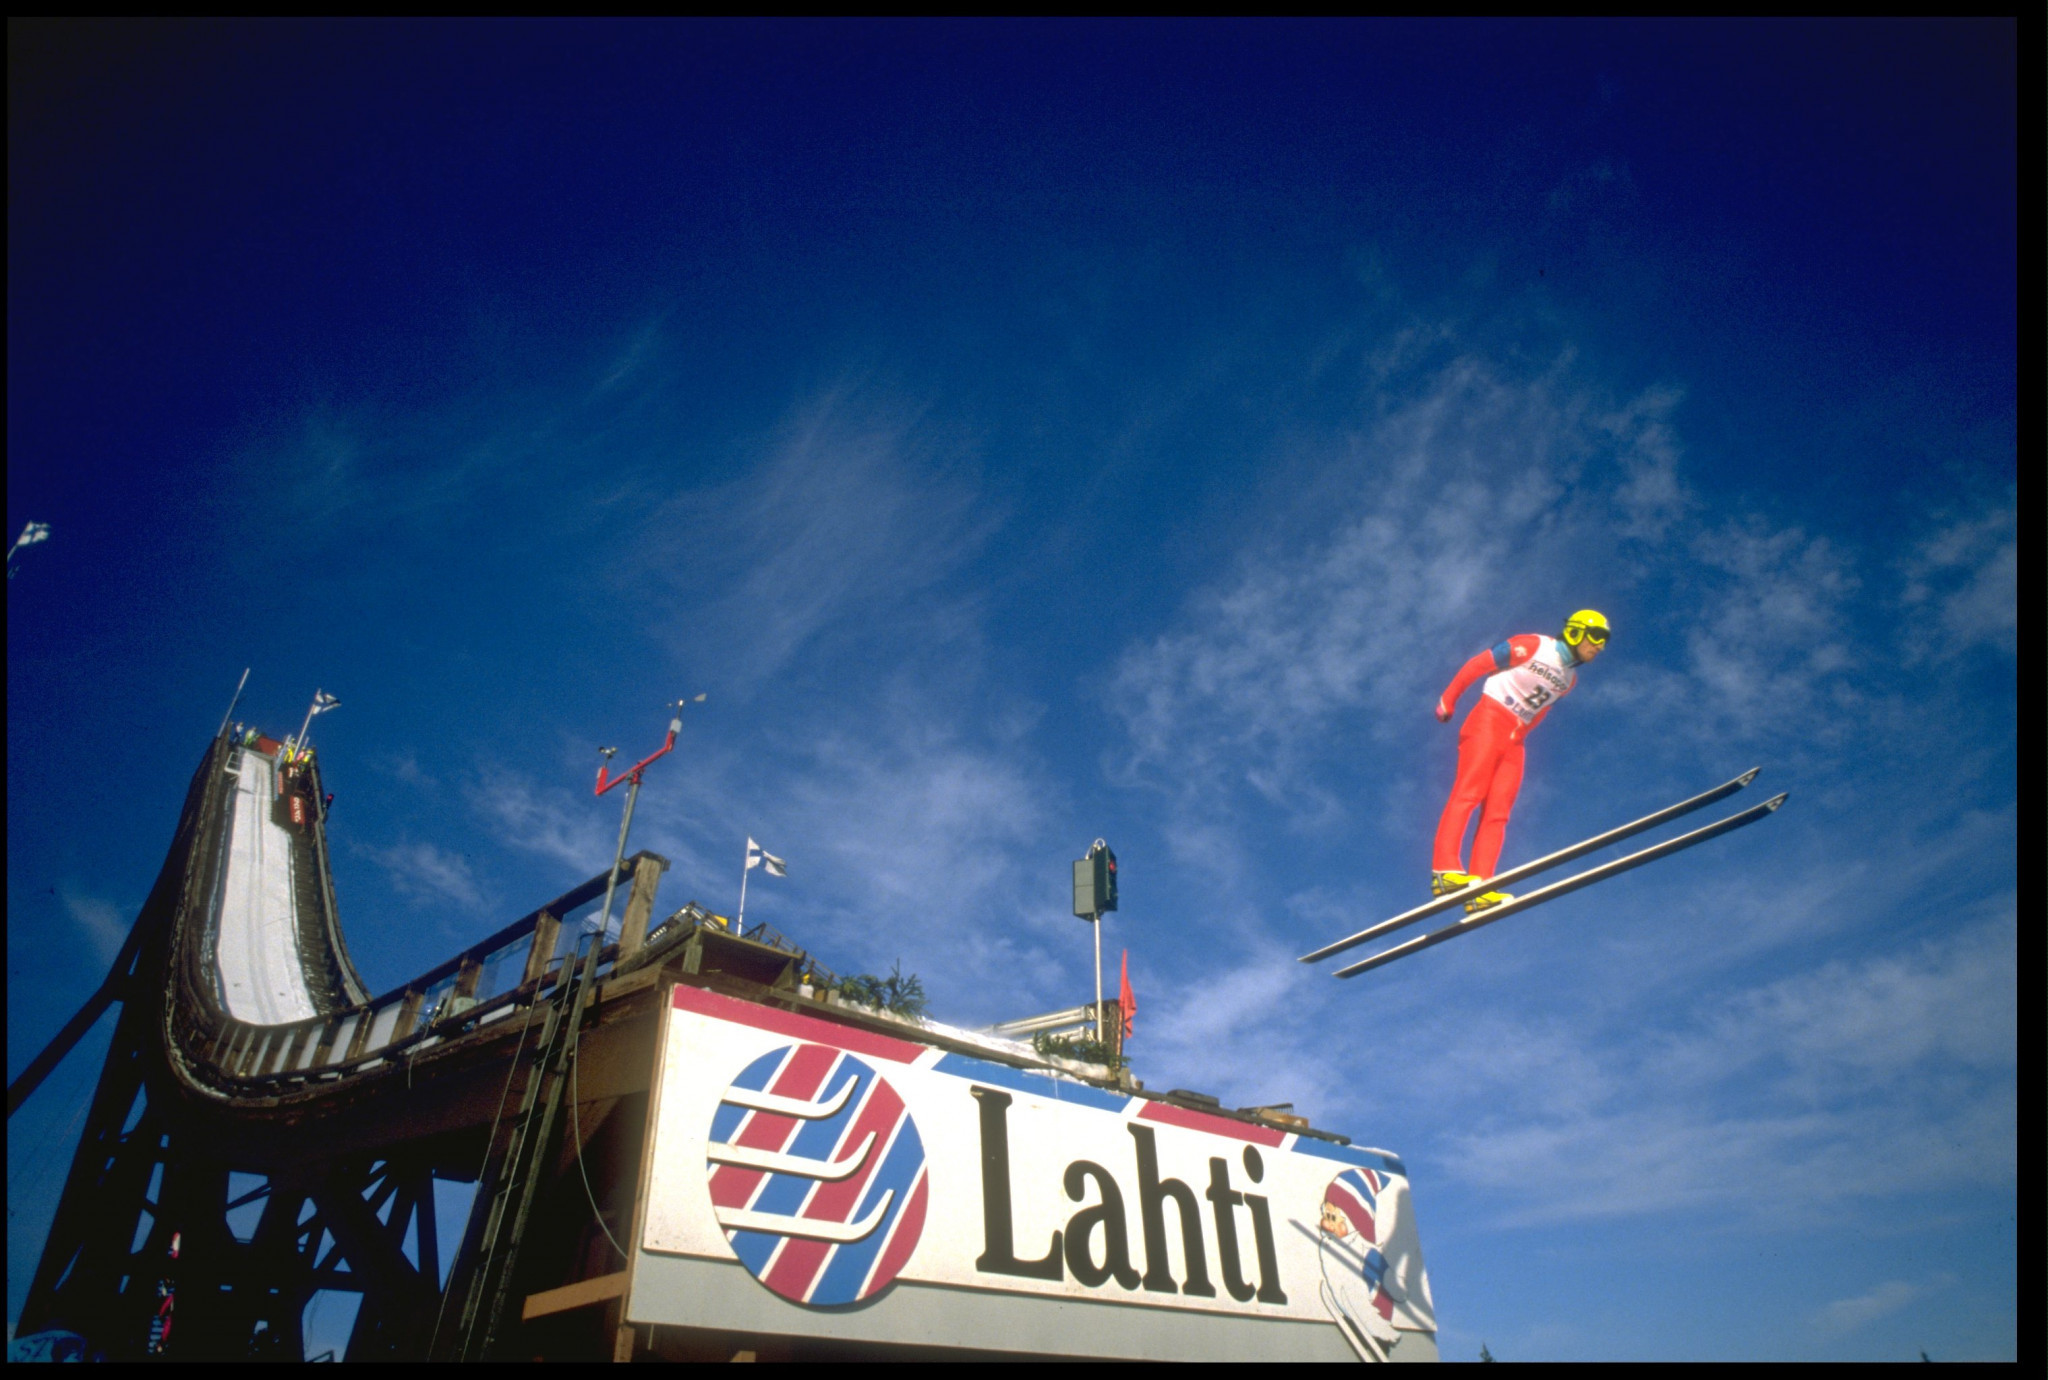 Lahti is set to host 10 events from March 24 to 26 in the FIS World Cups of Nordic combined, cross-country, and ski jumping ©Getty Images